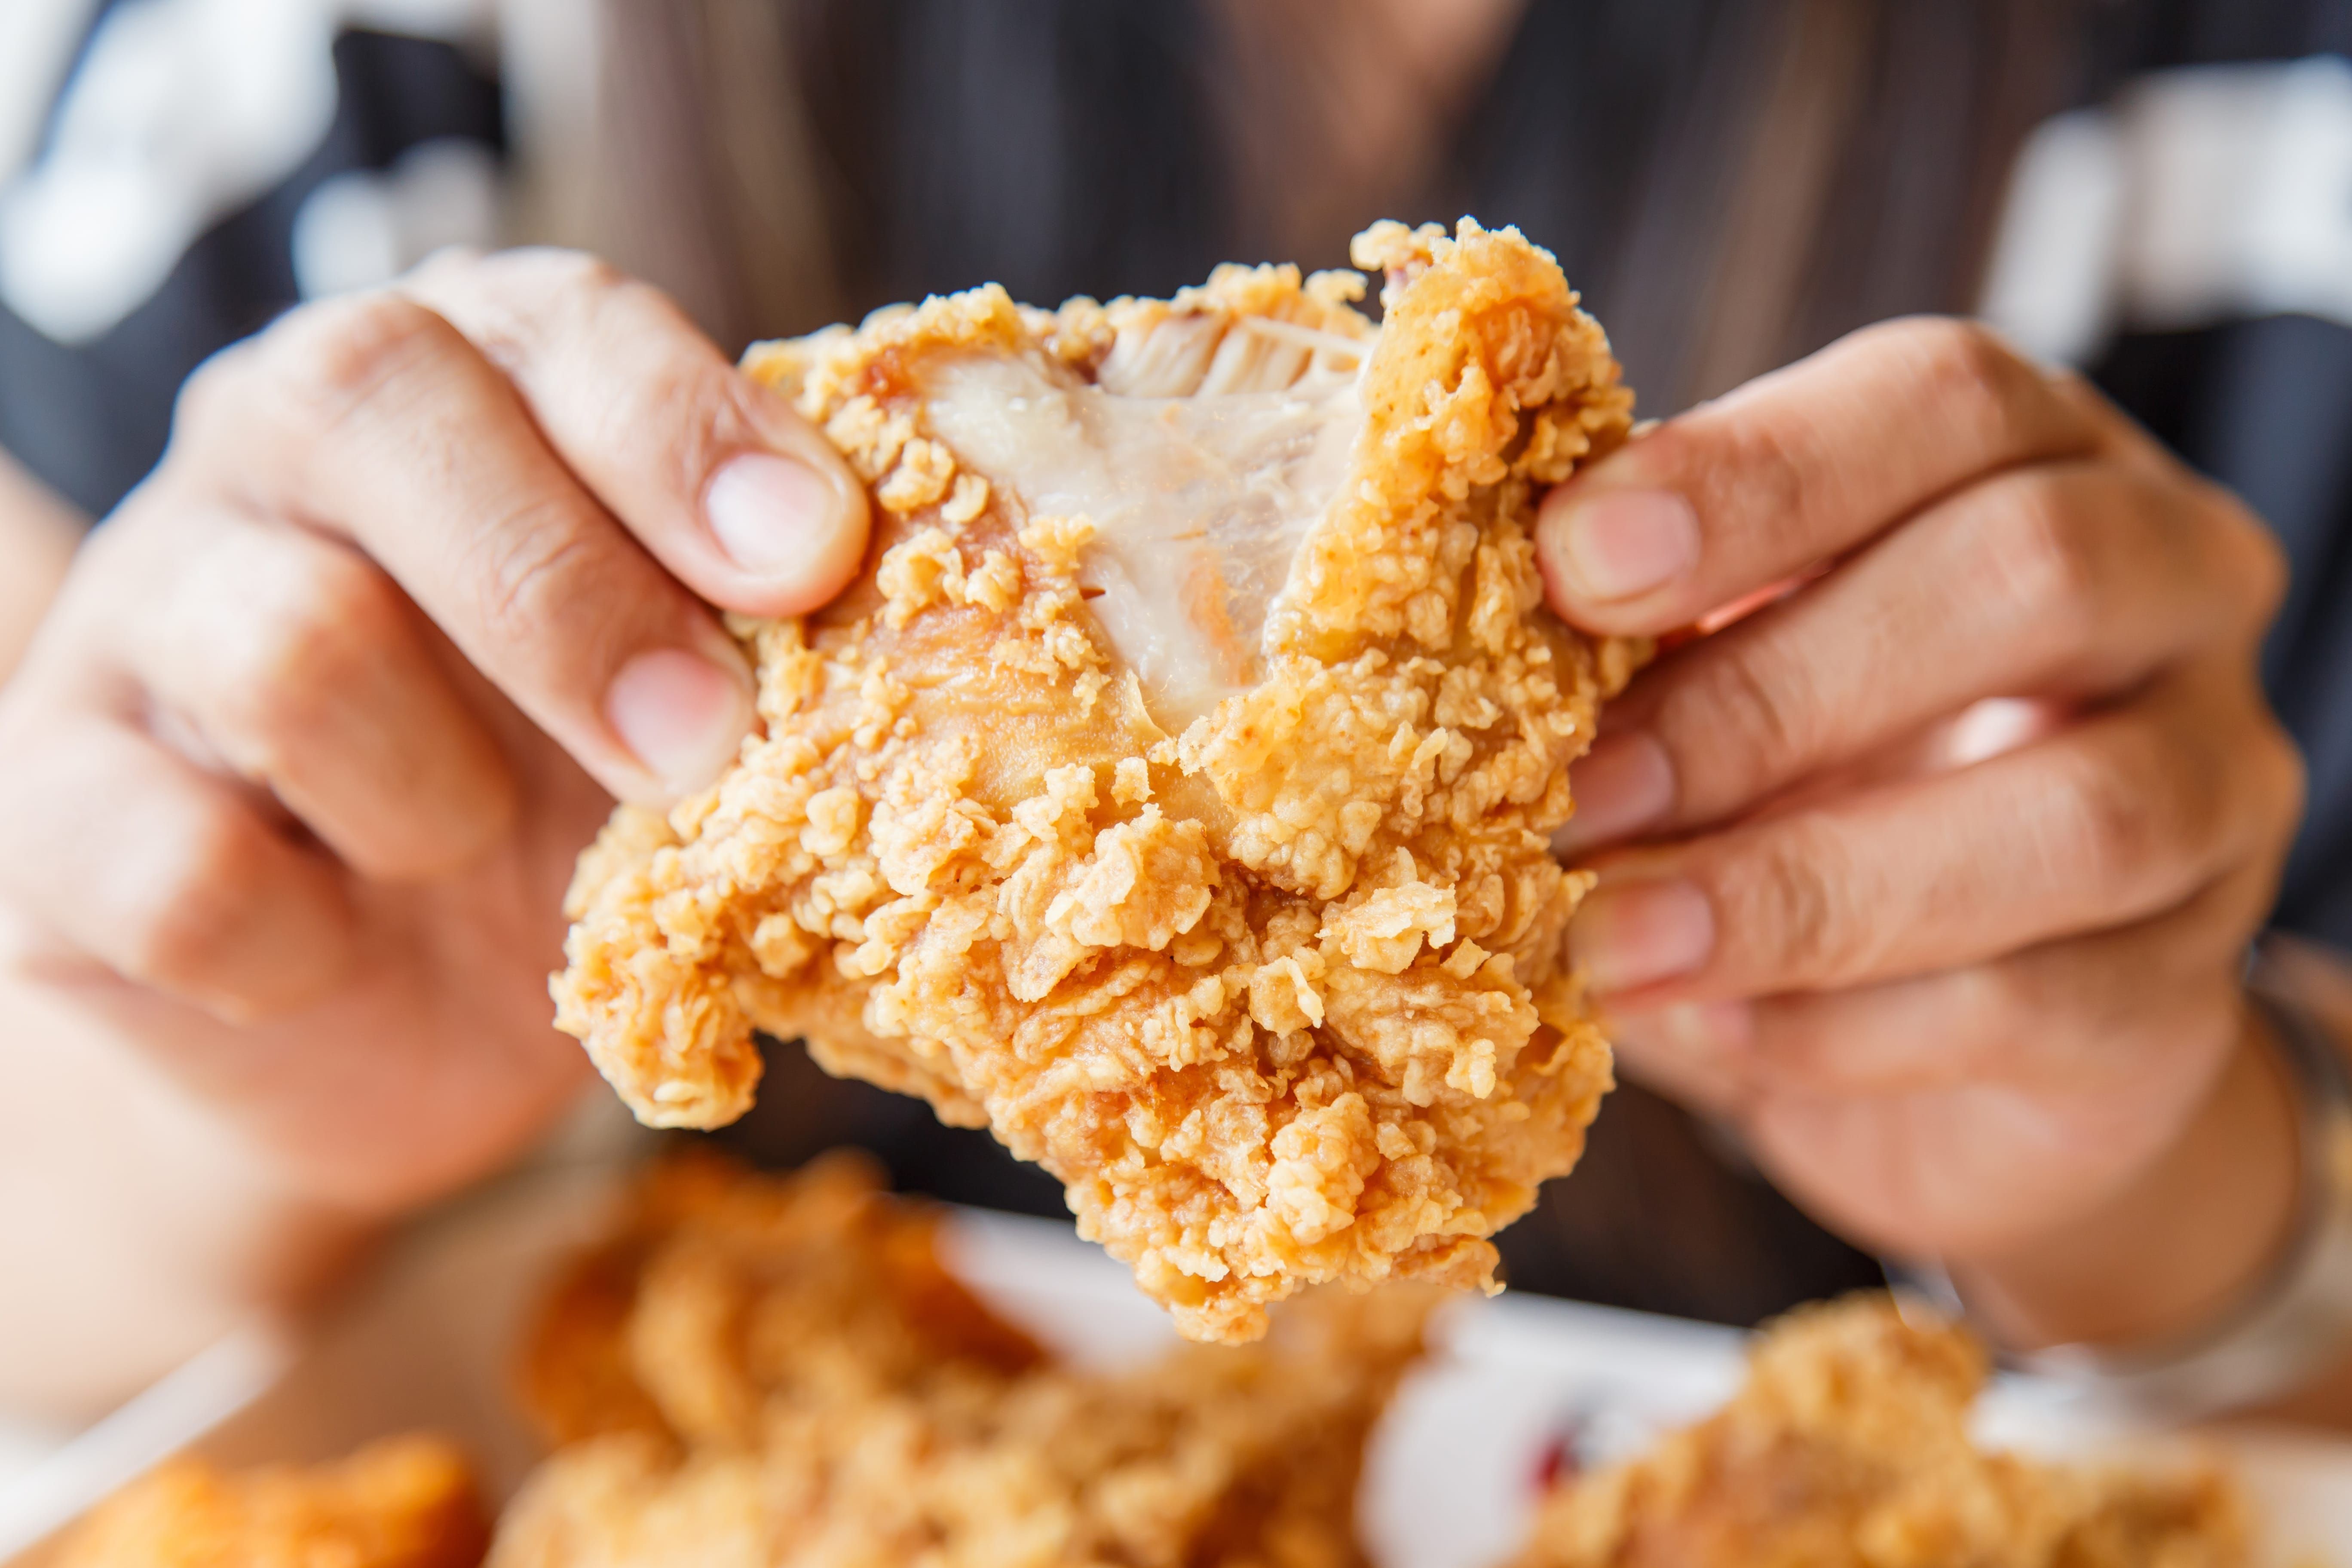 Which state in America has the best fried chicken?